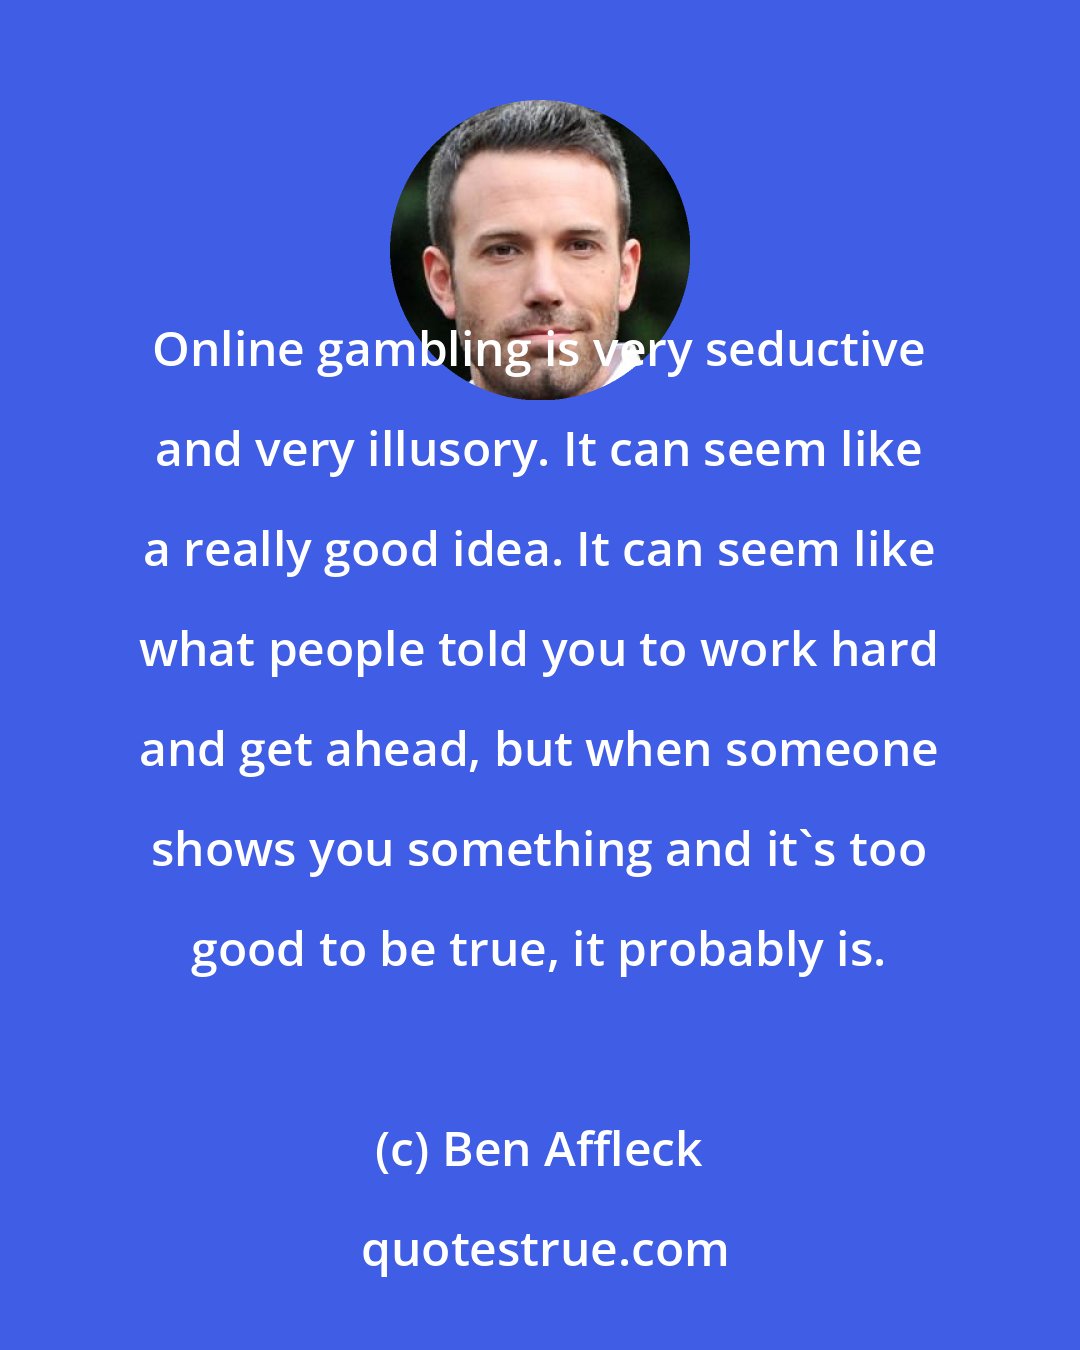 Ben Affleck: Online gambling is very seductive and very illusory. It can seem like a really good idea. It can seem like what people told you to work hard and get ahead, but when someone shows you something and it's too good to be true, it probably is.